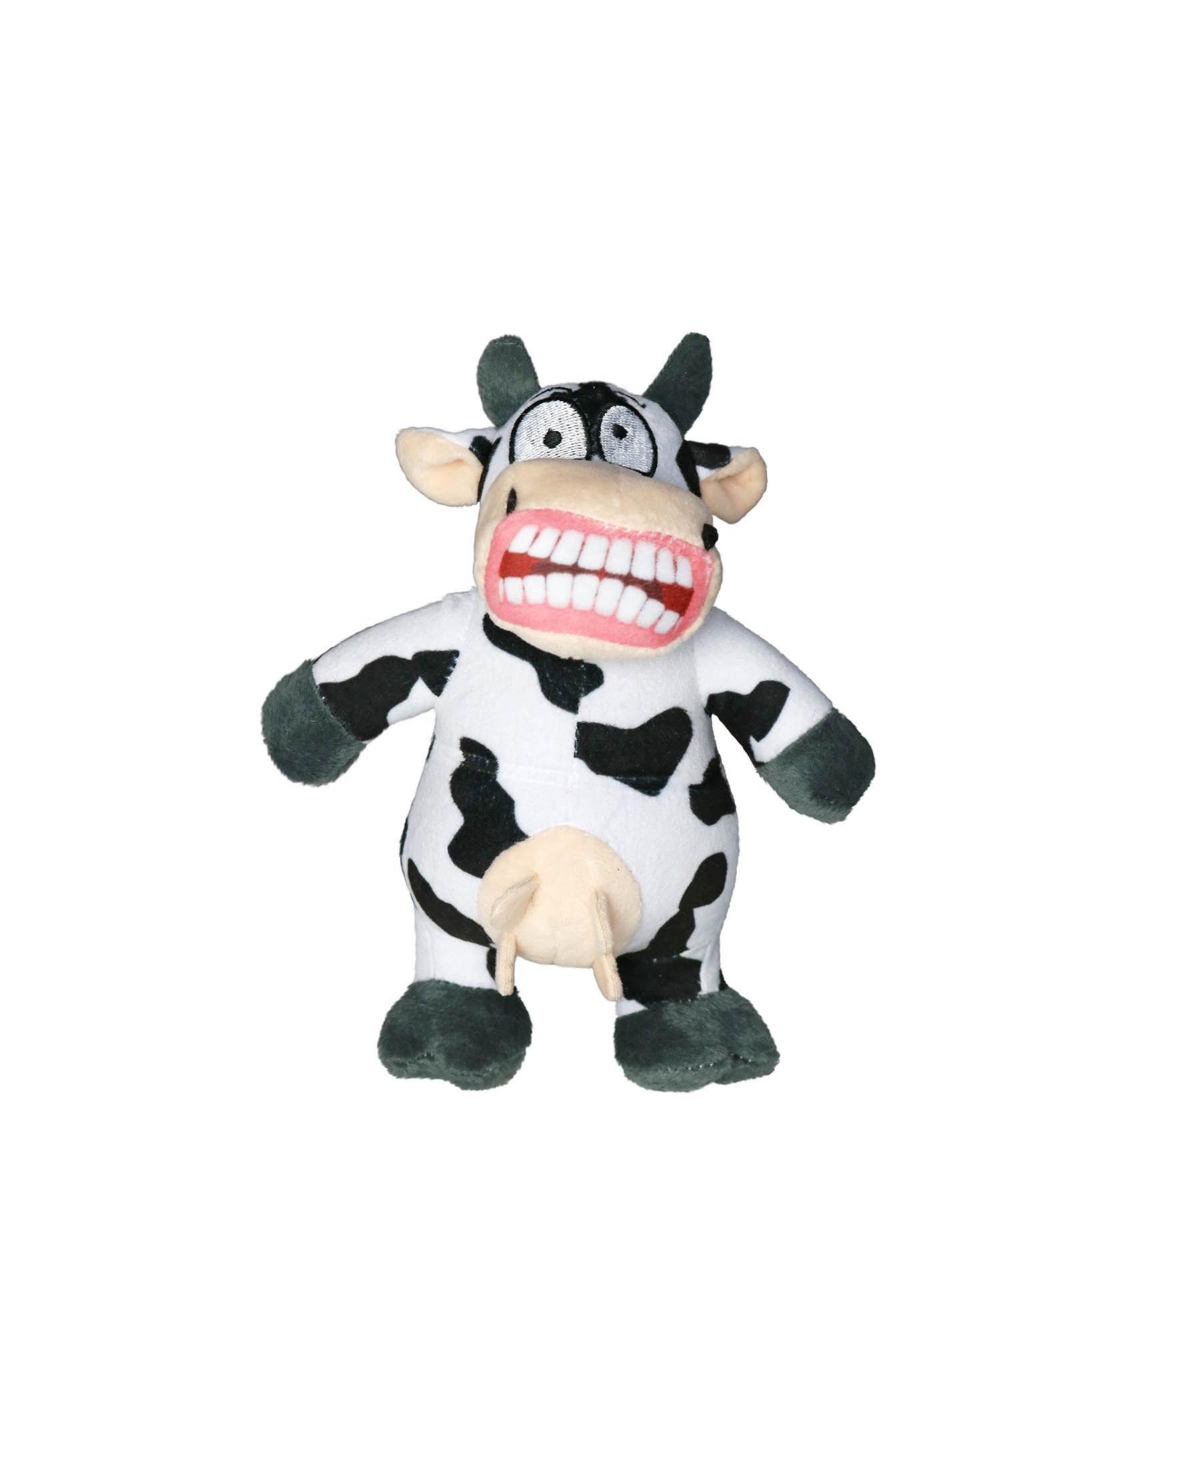 Jr Angry Animals Mad Cow, Dog Toy - White